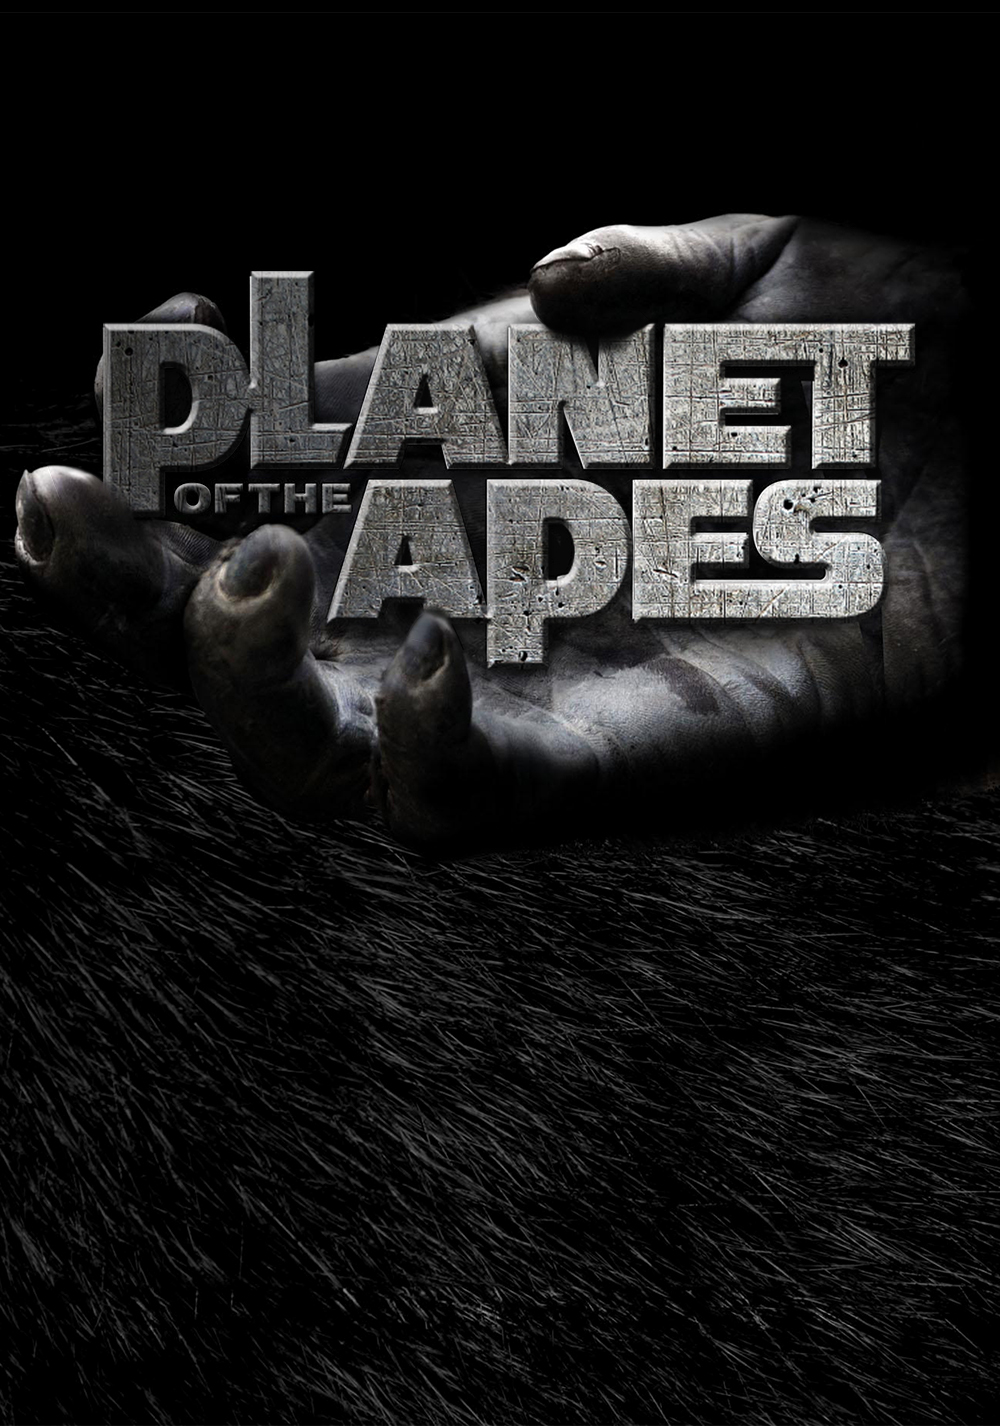 Planet of the Apes (2001) Art